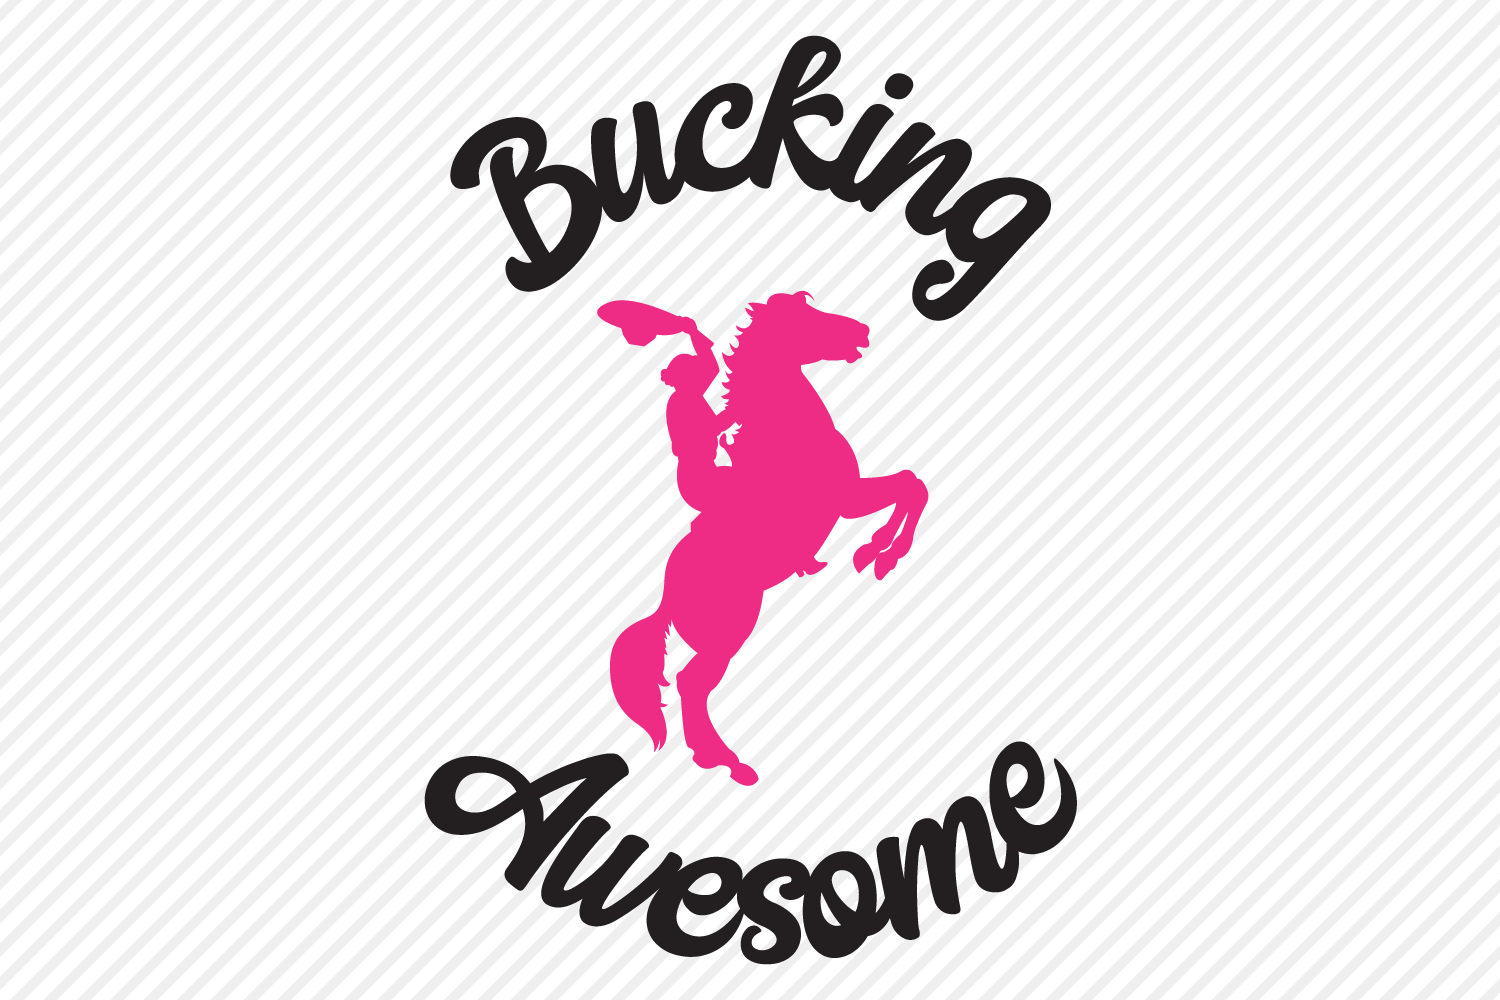 Download Bucking Awesome SVG, Cut File, Cowgirl Shirt Design, Horse